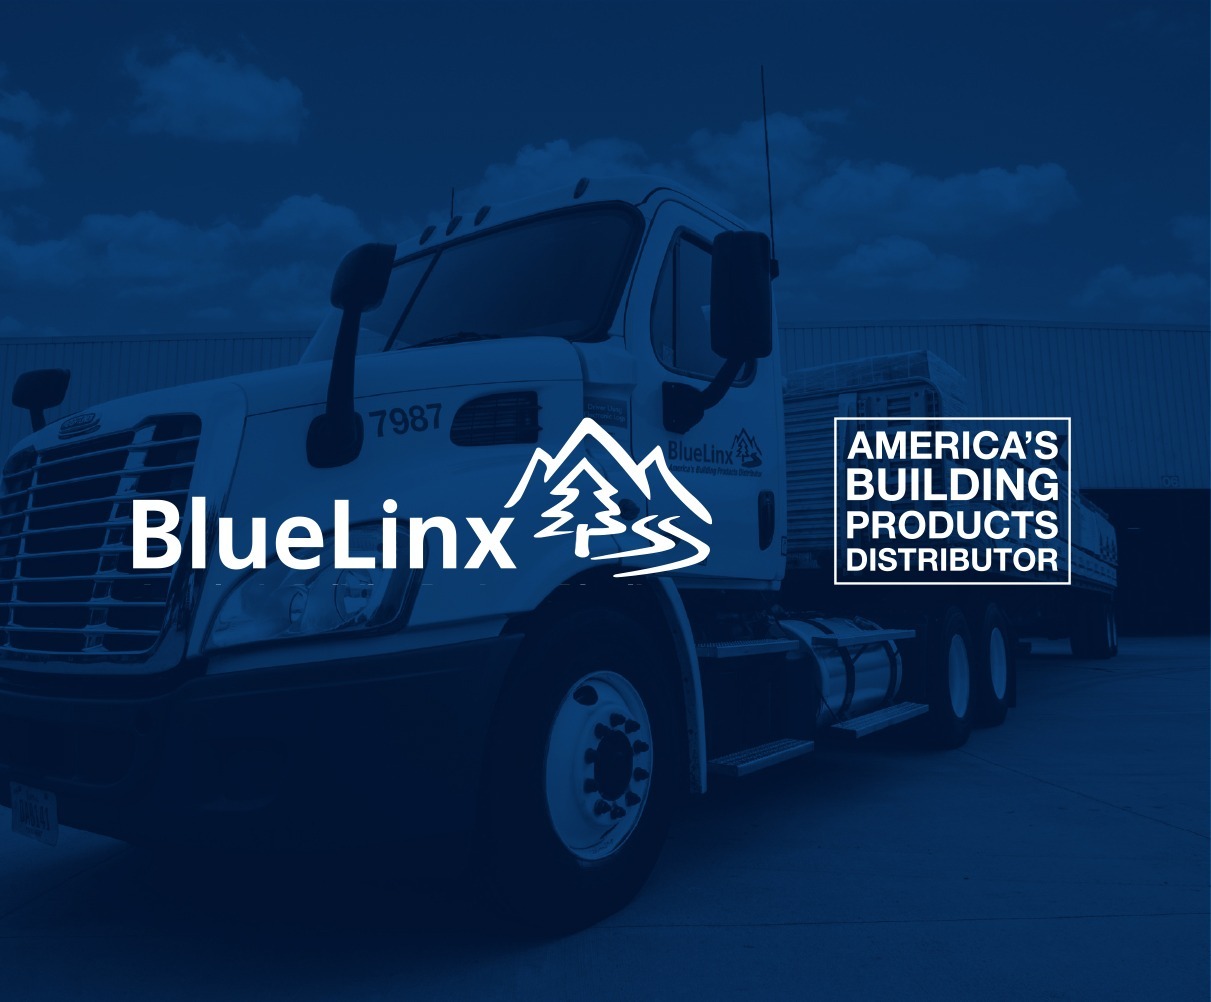 Read our comprehensive review of BlueLinx, a leading U.S. wholesale distributor of building products. Discover their extensive product range, strong market position, and commitment to customer satisfaction. Partner with Gott Marketing for all your marketing needs in the construction industry.